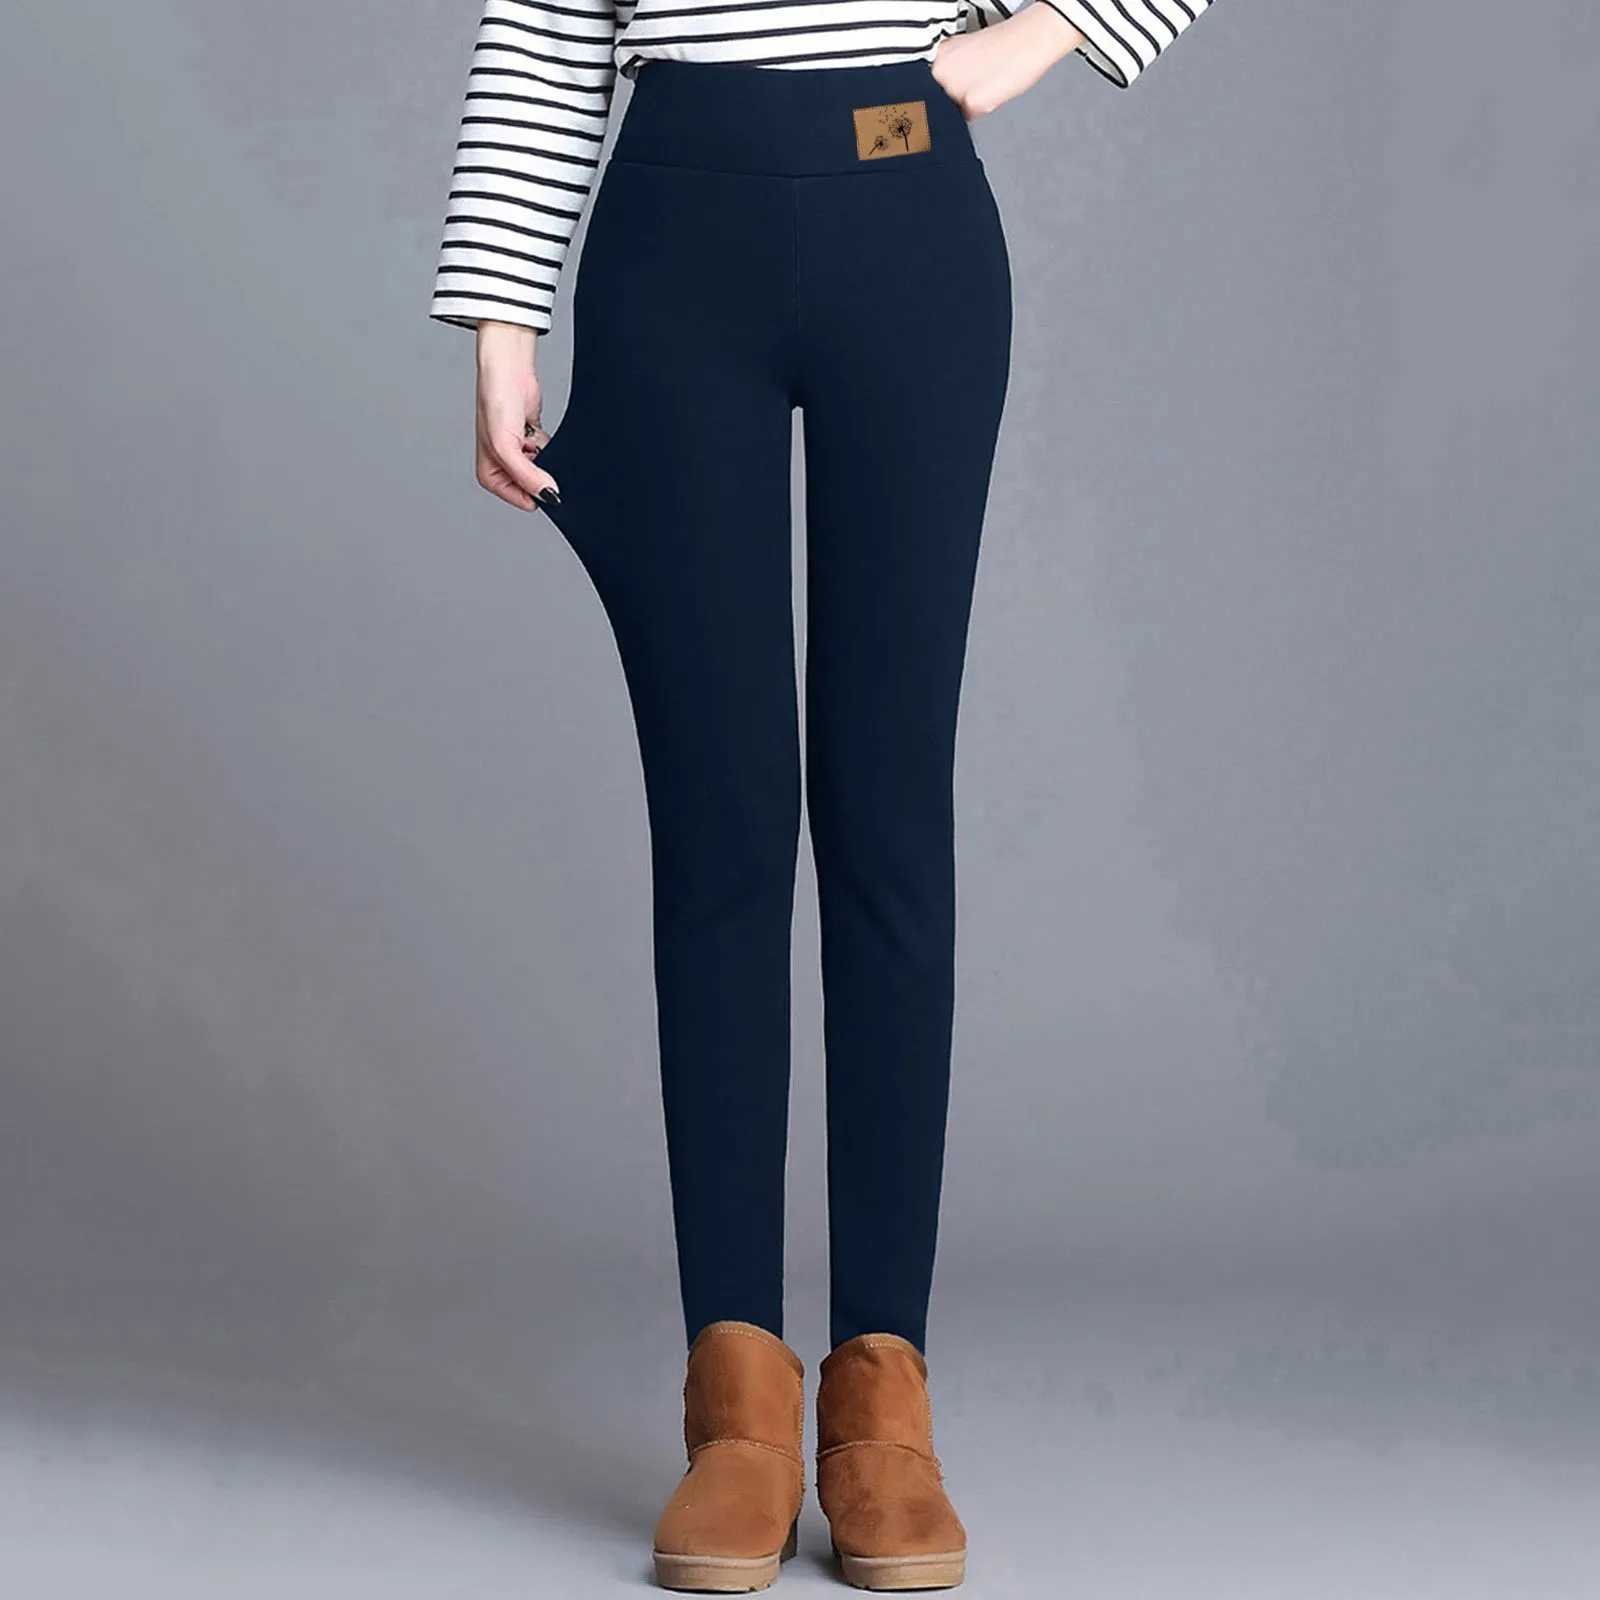 Women Fluffy Pants Winter Fleece Thicken Solid Color High Waist Trousers Thermal Slim Stretchy Thick Warm Skinny Tight Leggings new summer women denim pants buckle design high stretchy jeans middle waist girls tight skinny pencil trousers